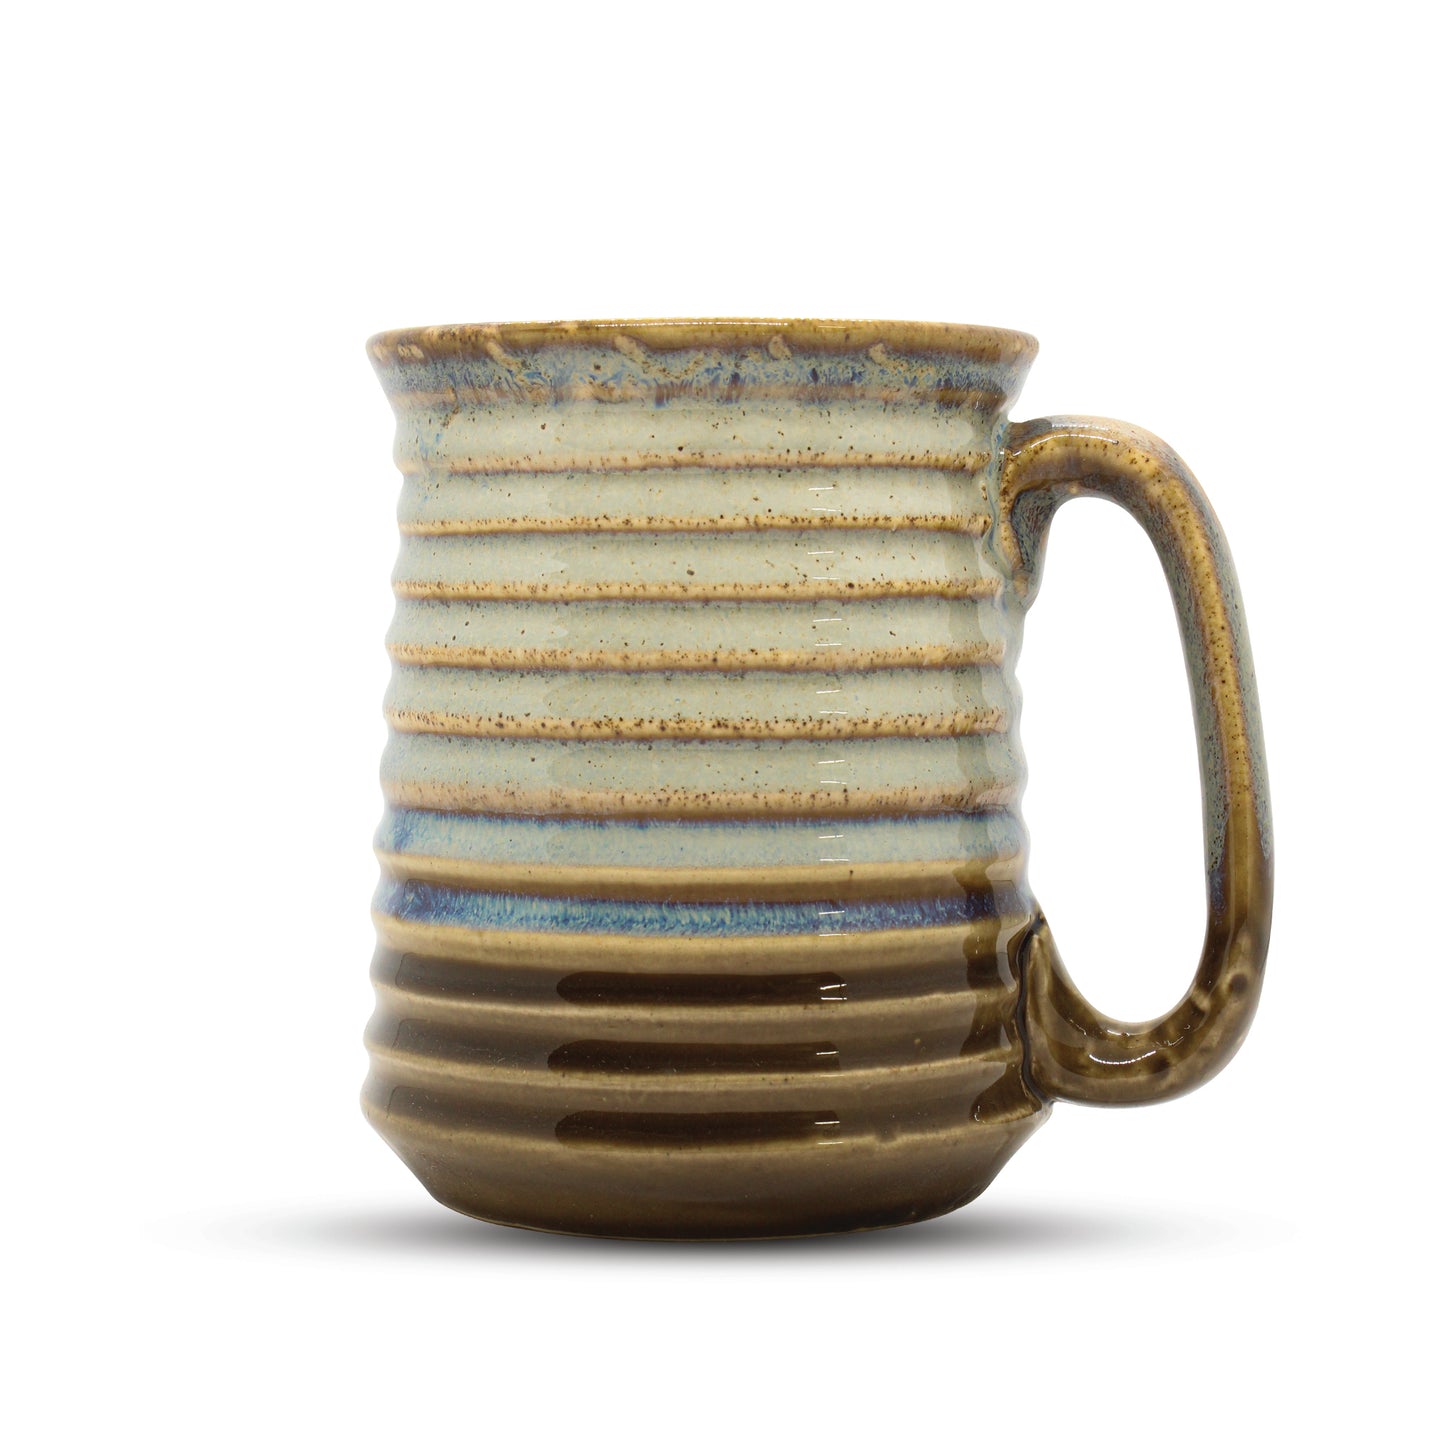 'That's You Right There, Hungover!' Ceramic Beer Mug